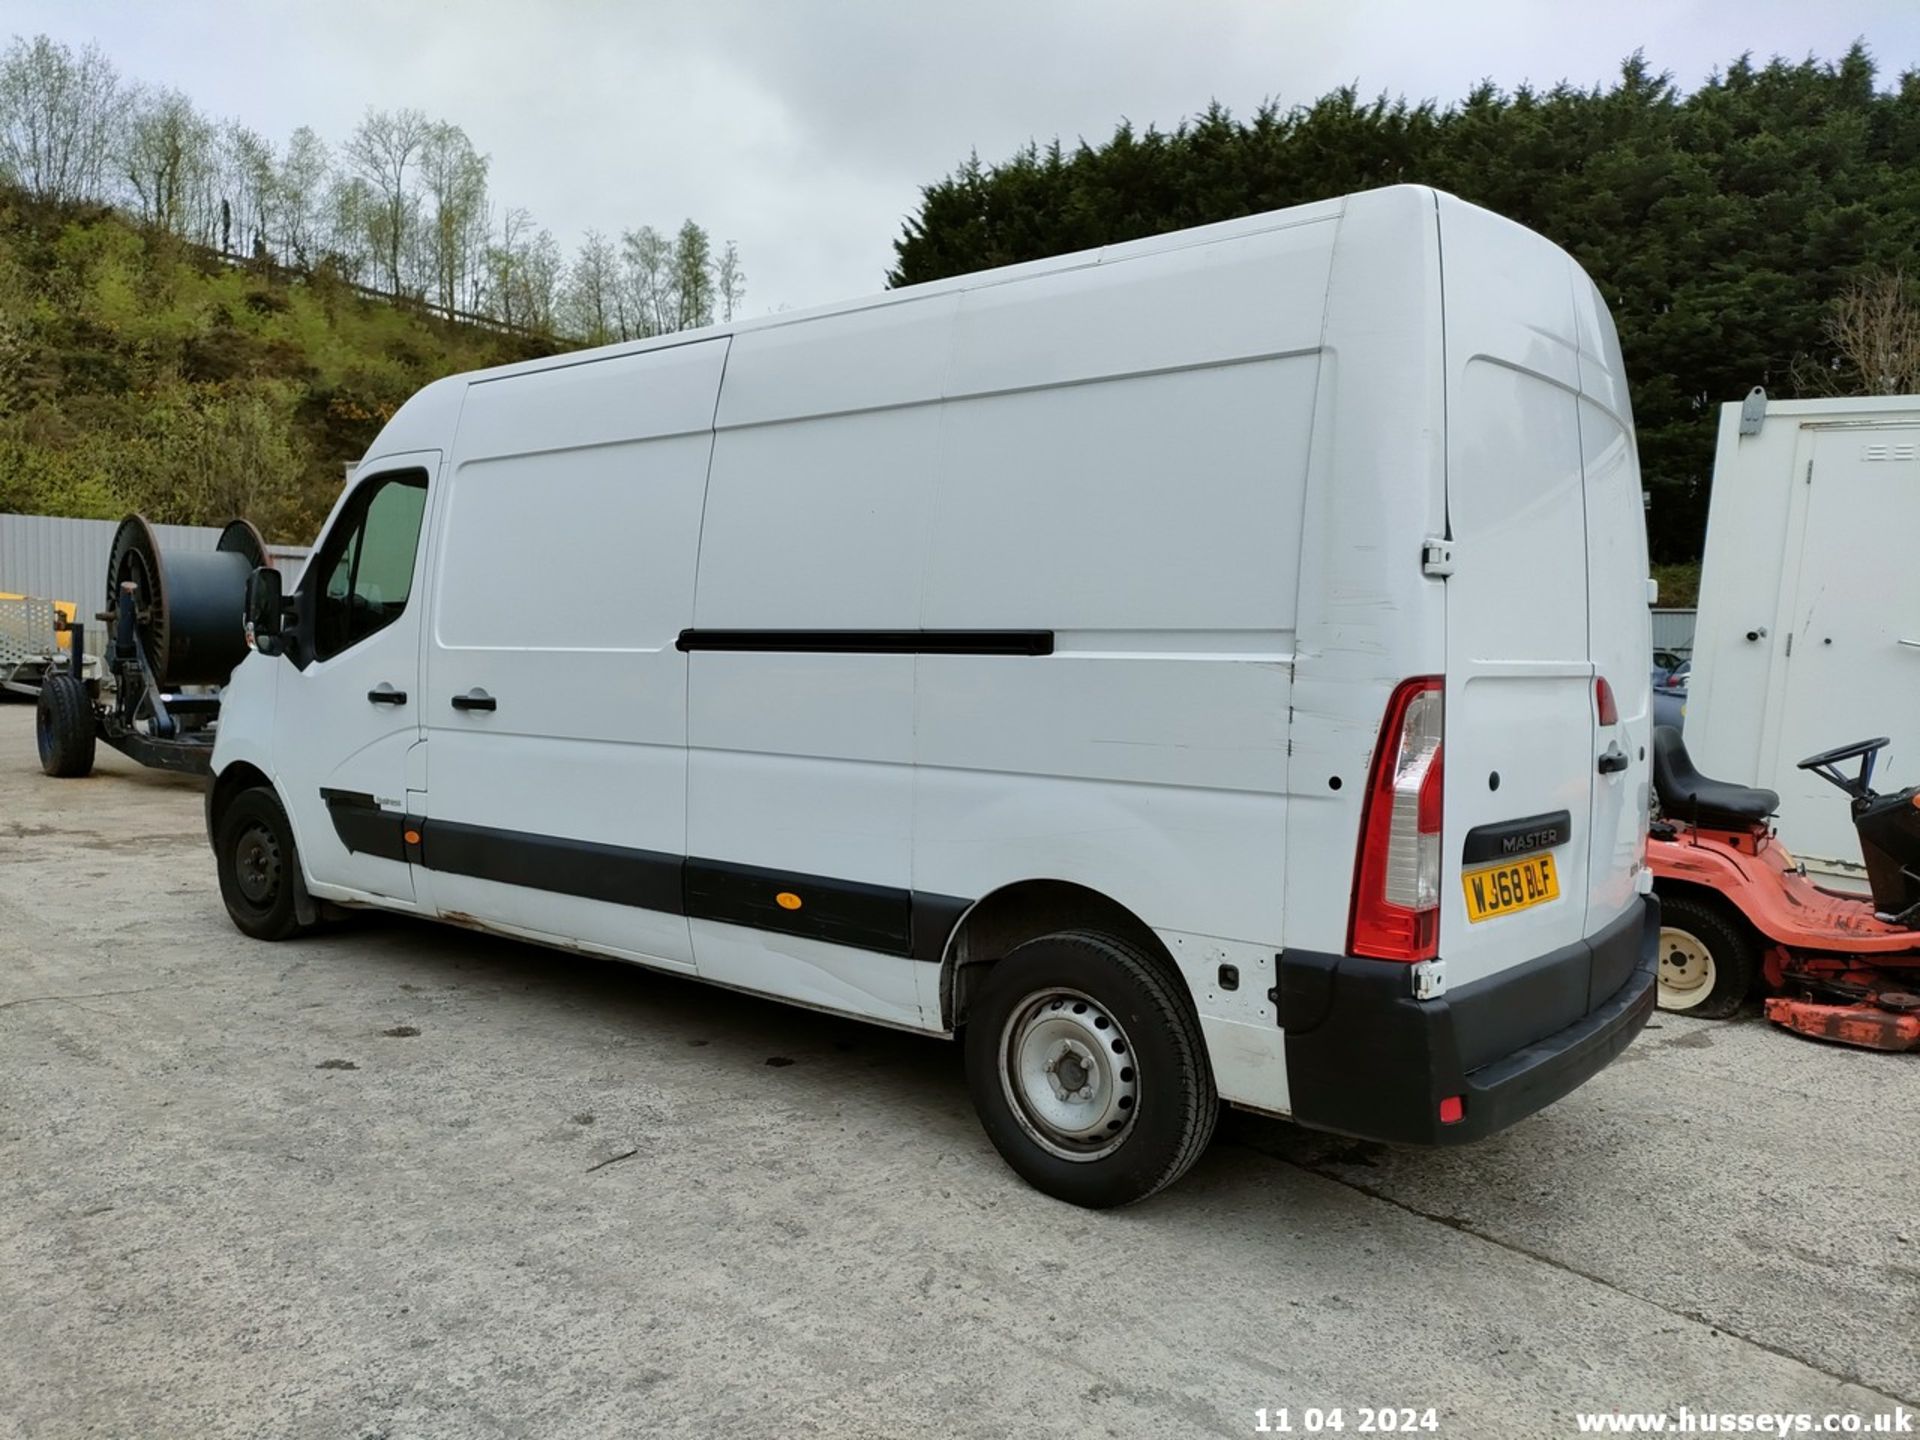 18/68 RENAULT MASTER LM35 BUSINESS DCI - 2298cc 5dr Van (White) - Image 23 of 68